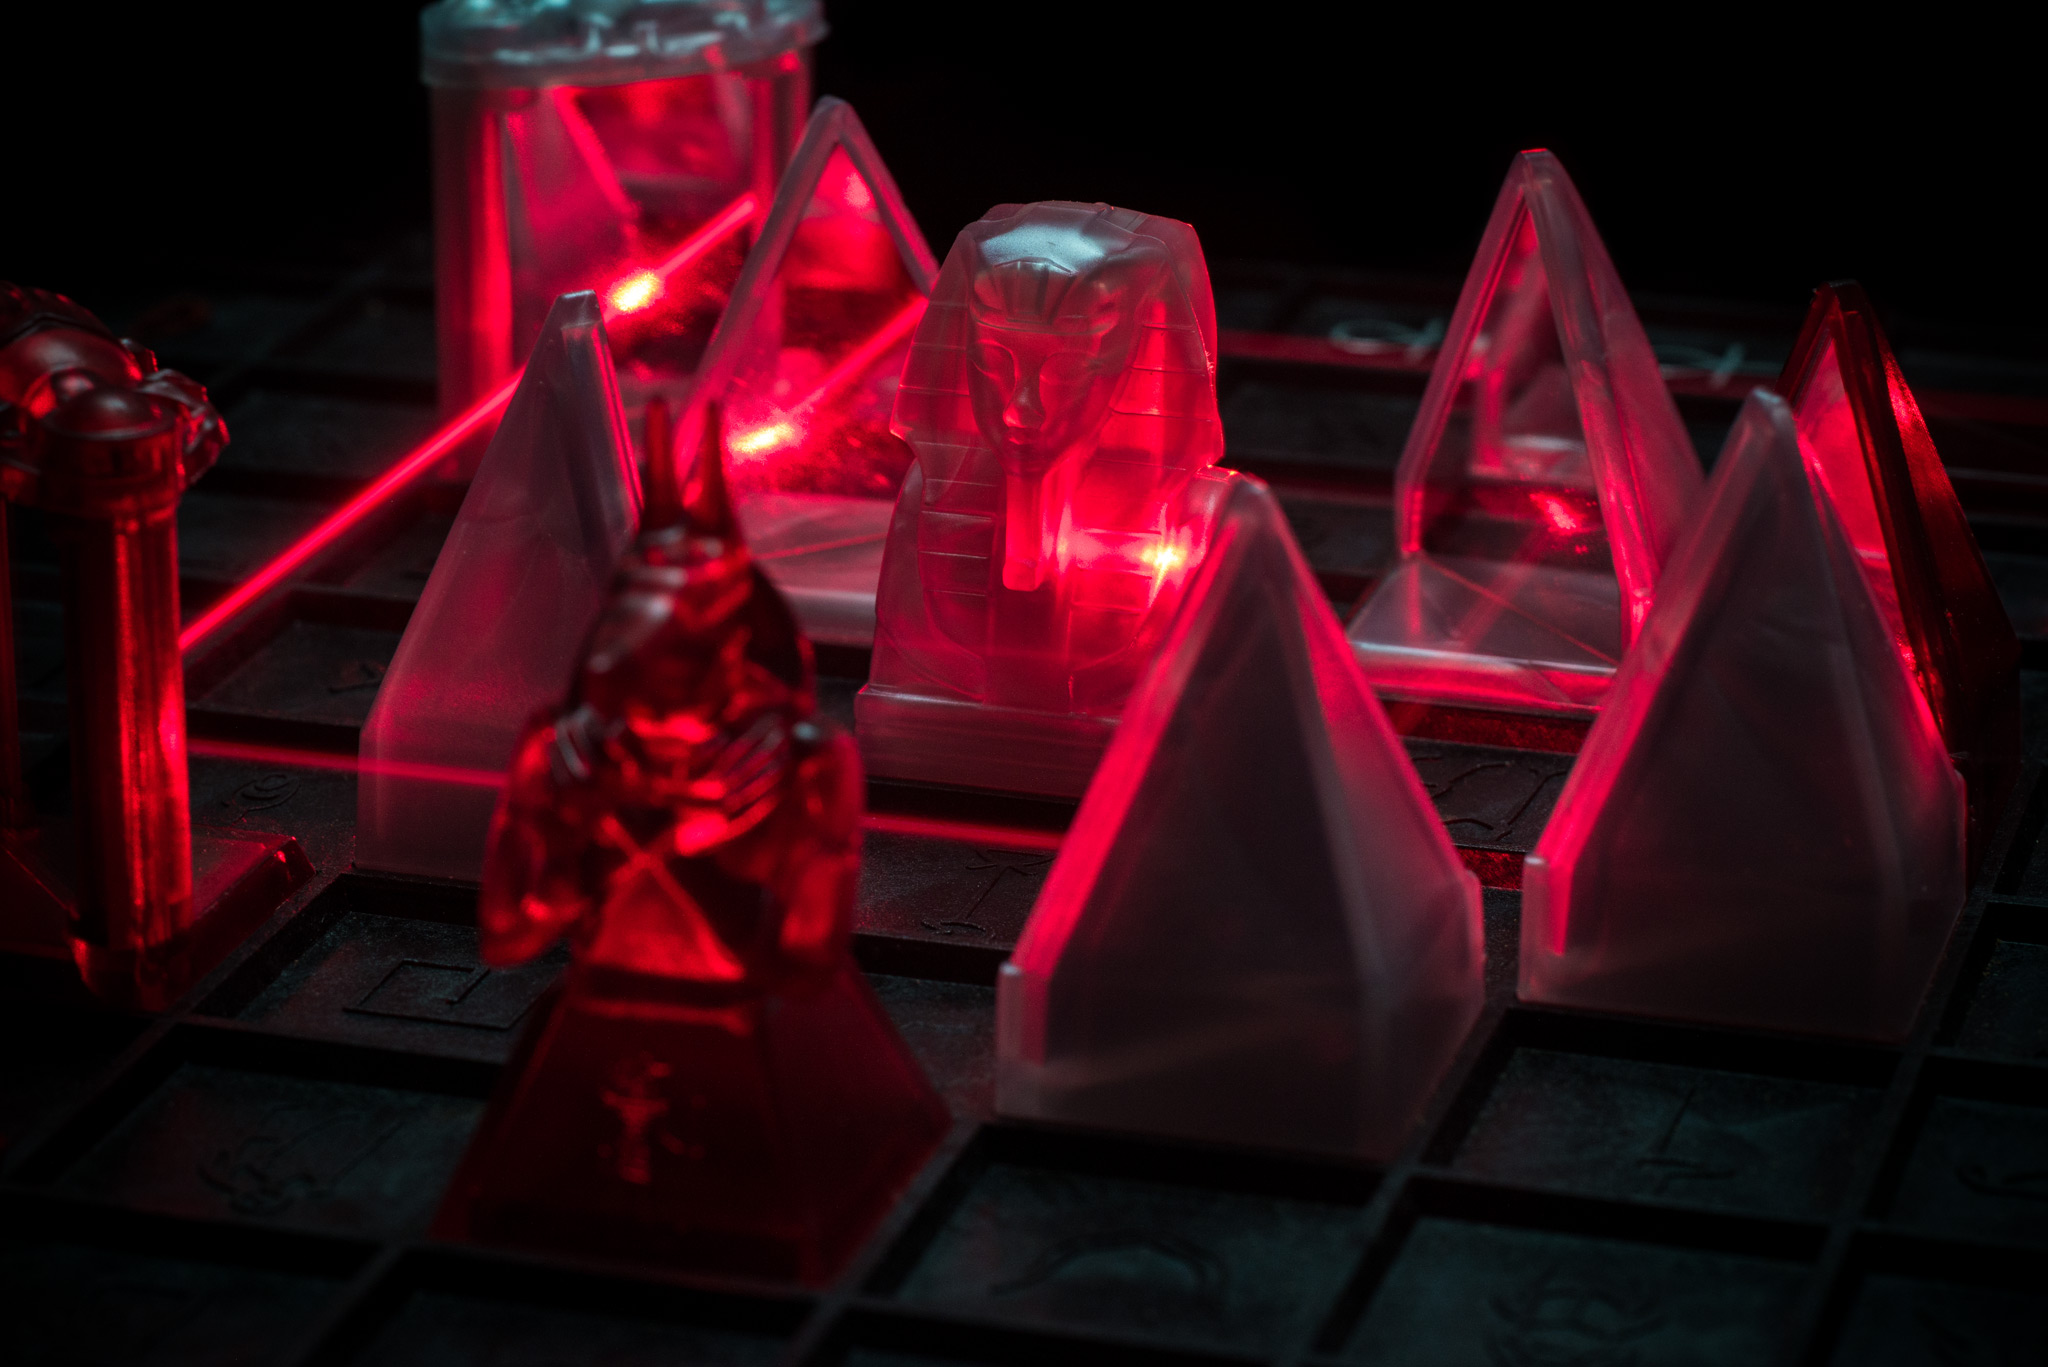 Laser Khet 2.0 abstract board game